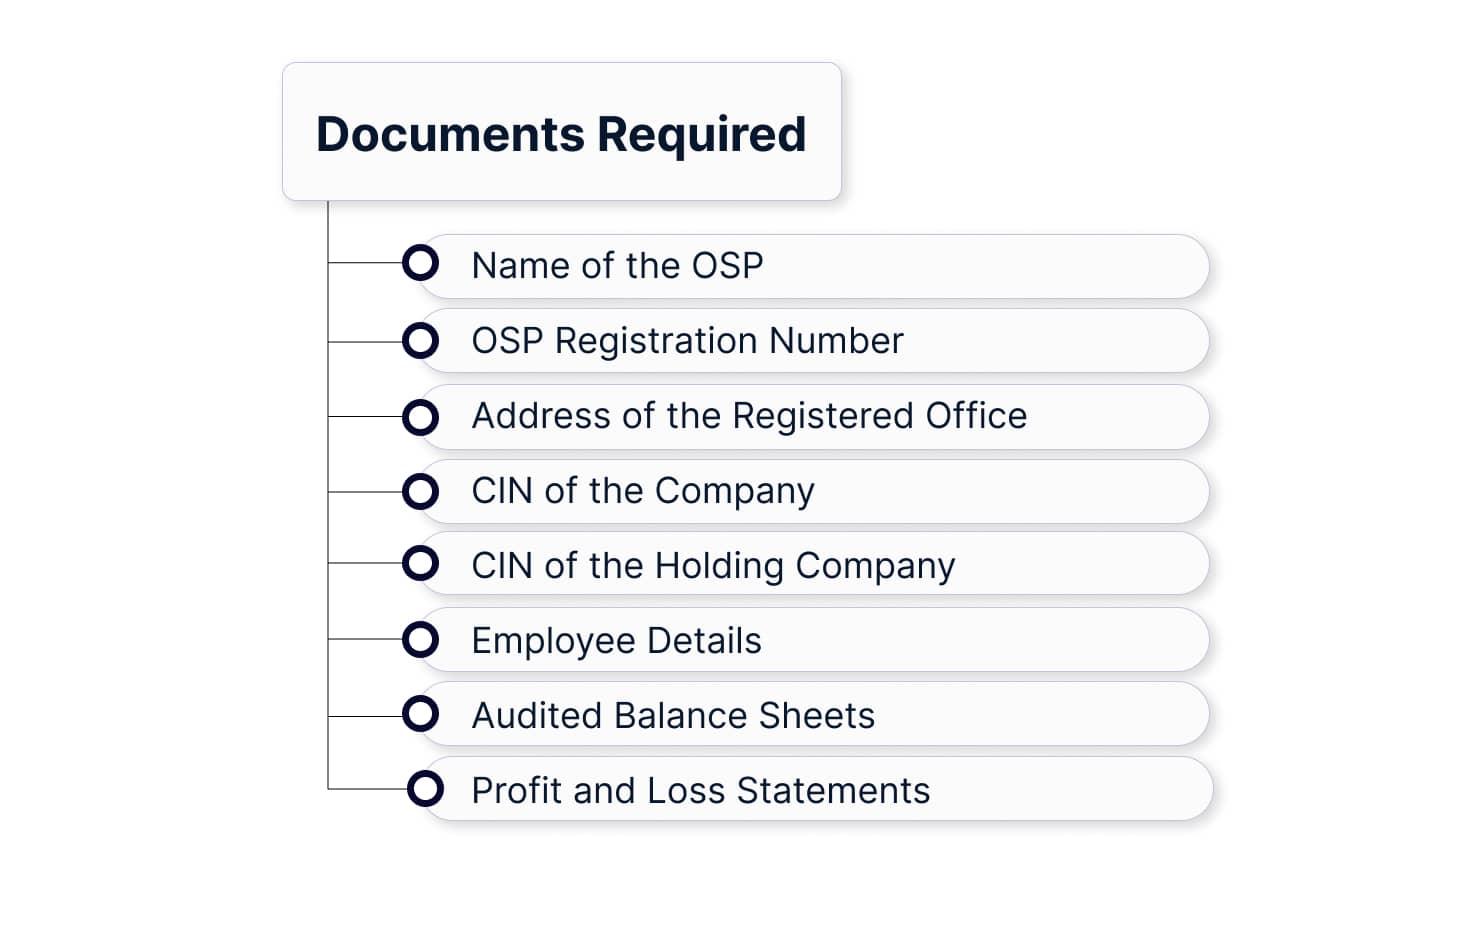 the documents required to file the DoT Compliance through the annual return: